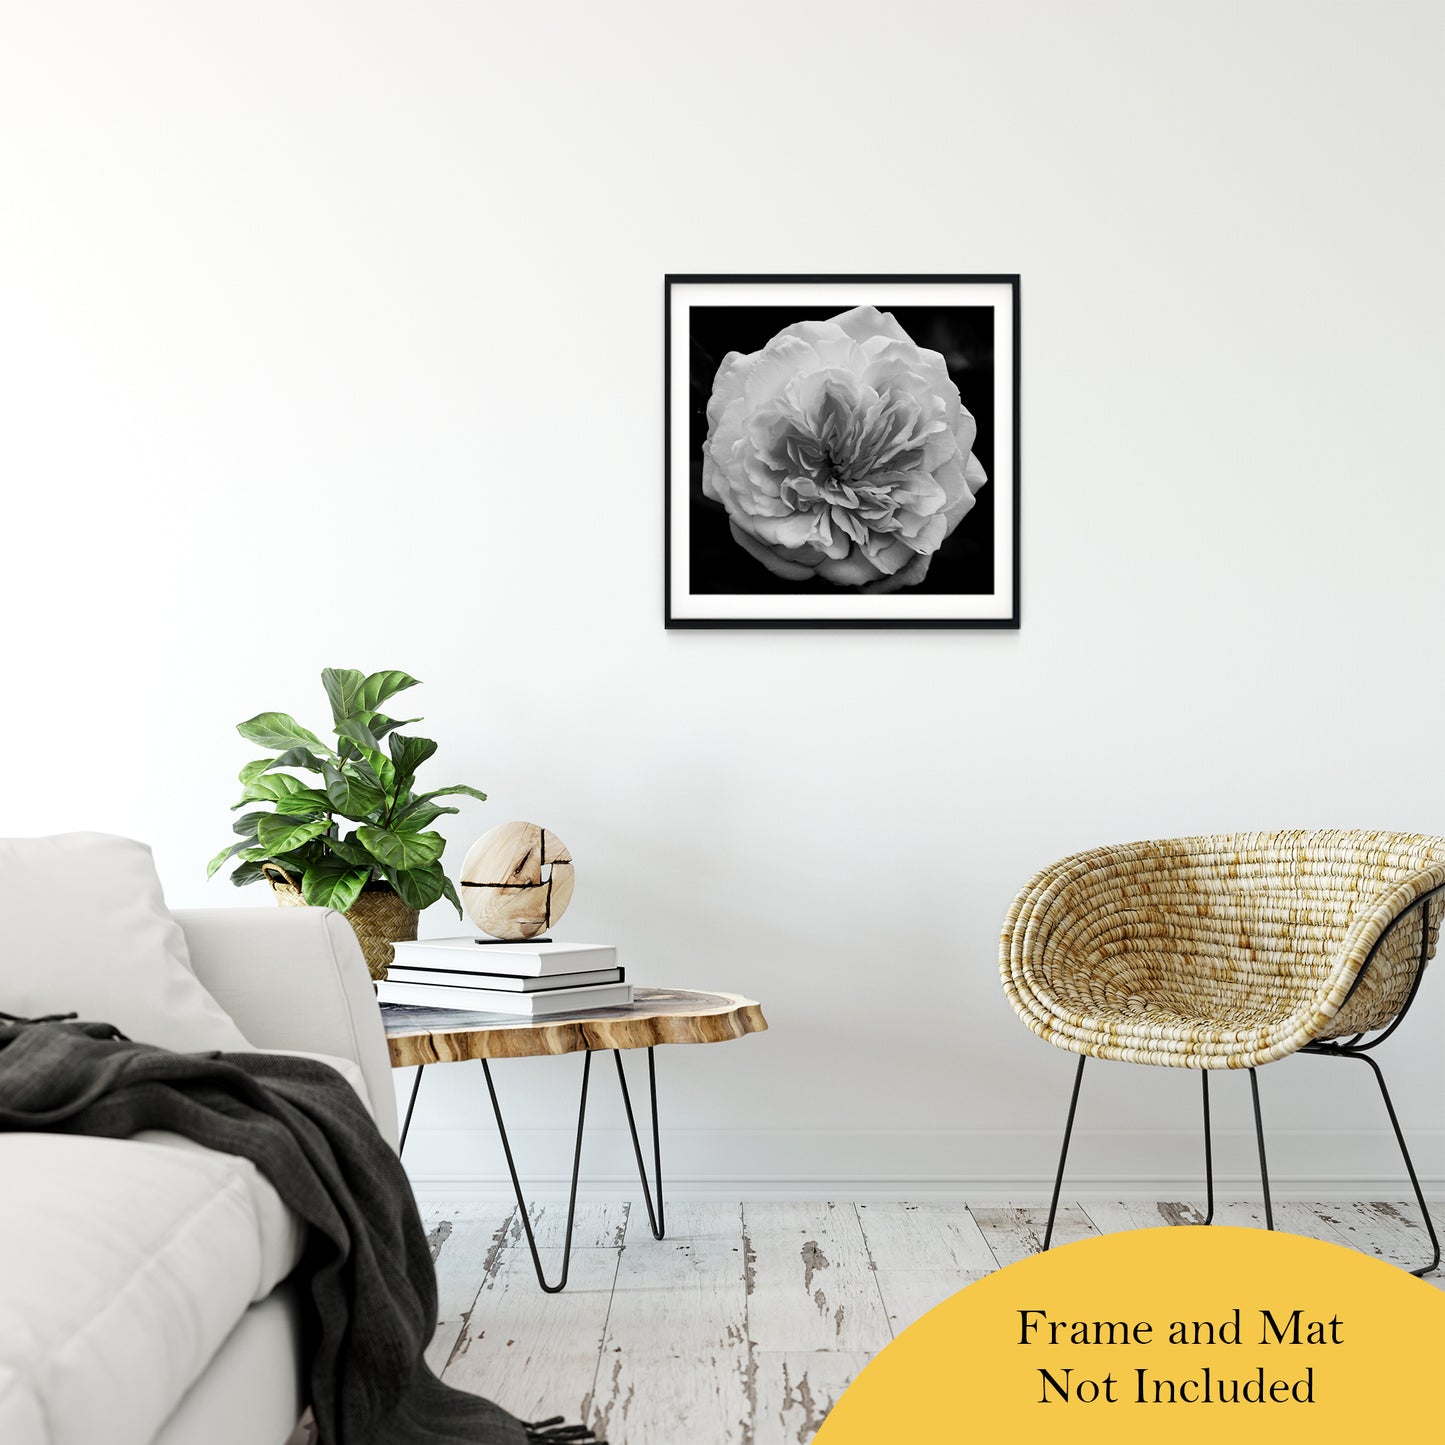 Bedroom Wall Art Nature: Alchymist Rose Black & White - Square  Nature / Floral Photo Fine Art & Unframed Wall Art Prints 24" x 24" / Classic Paper - Unframed - PIPAFINEART